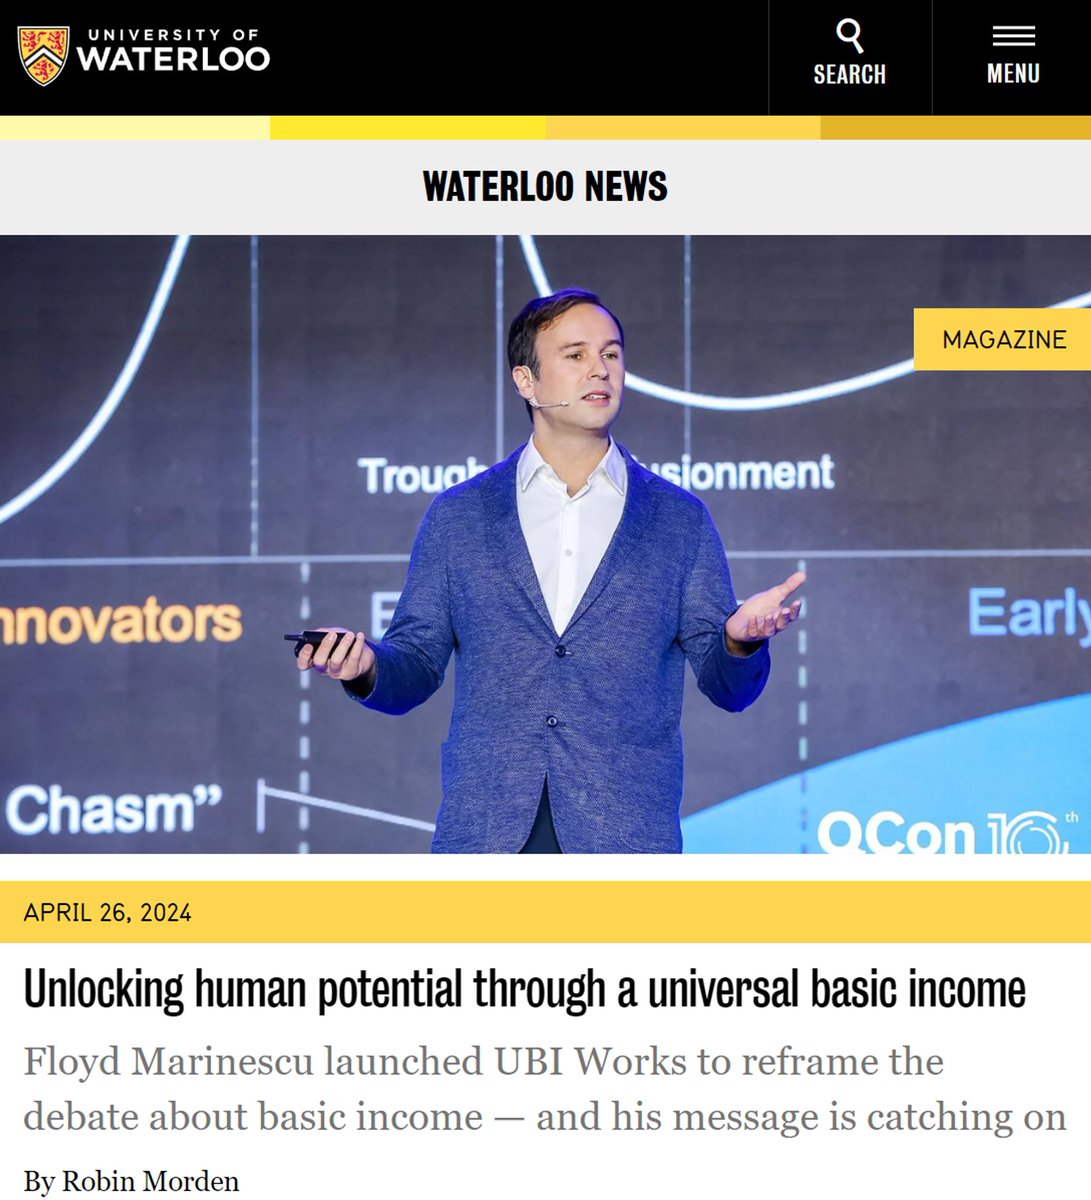 Thanks University of Waterloo for this spotlight article on our journey promoting basic income in Canada! “I believe innovation most often comes from inspiration, not desperation,' Marinescu said. 'Innovators like Newton and Botticelli had the security to tinker and create. I…